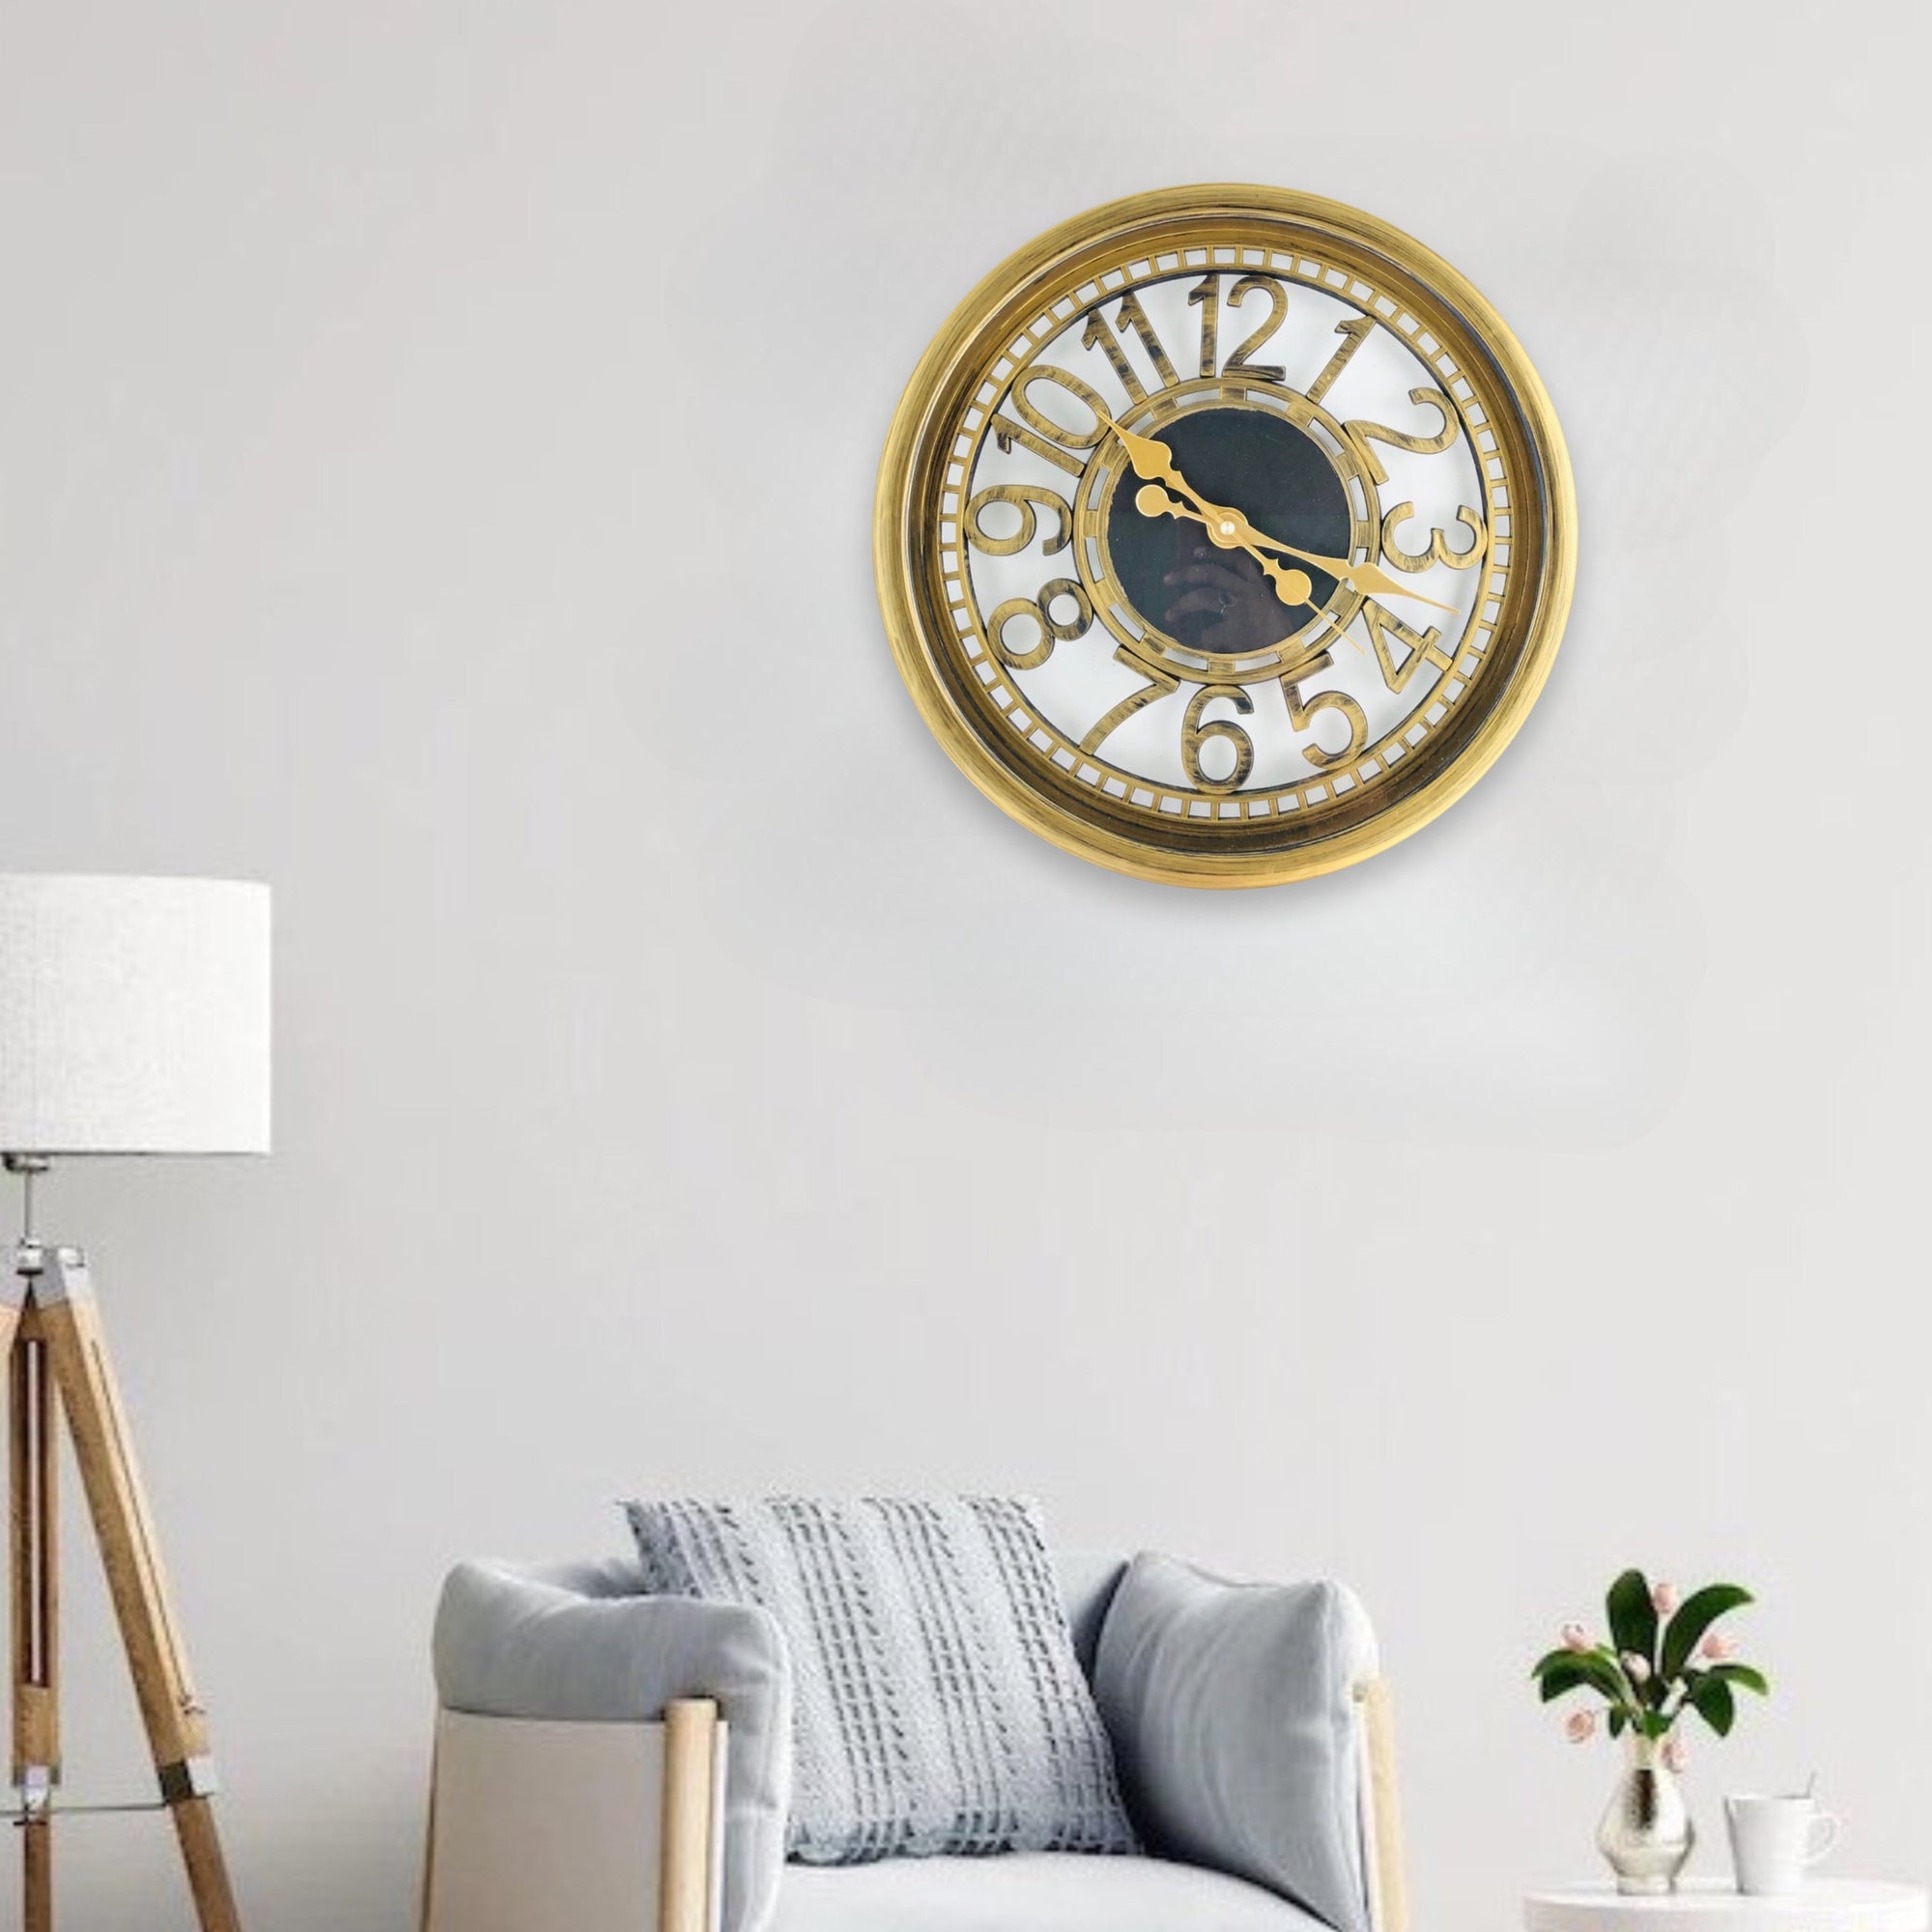 Wall Clock With Golden Border